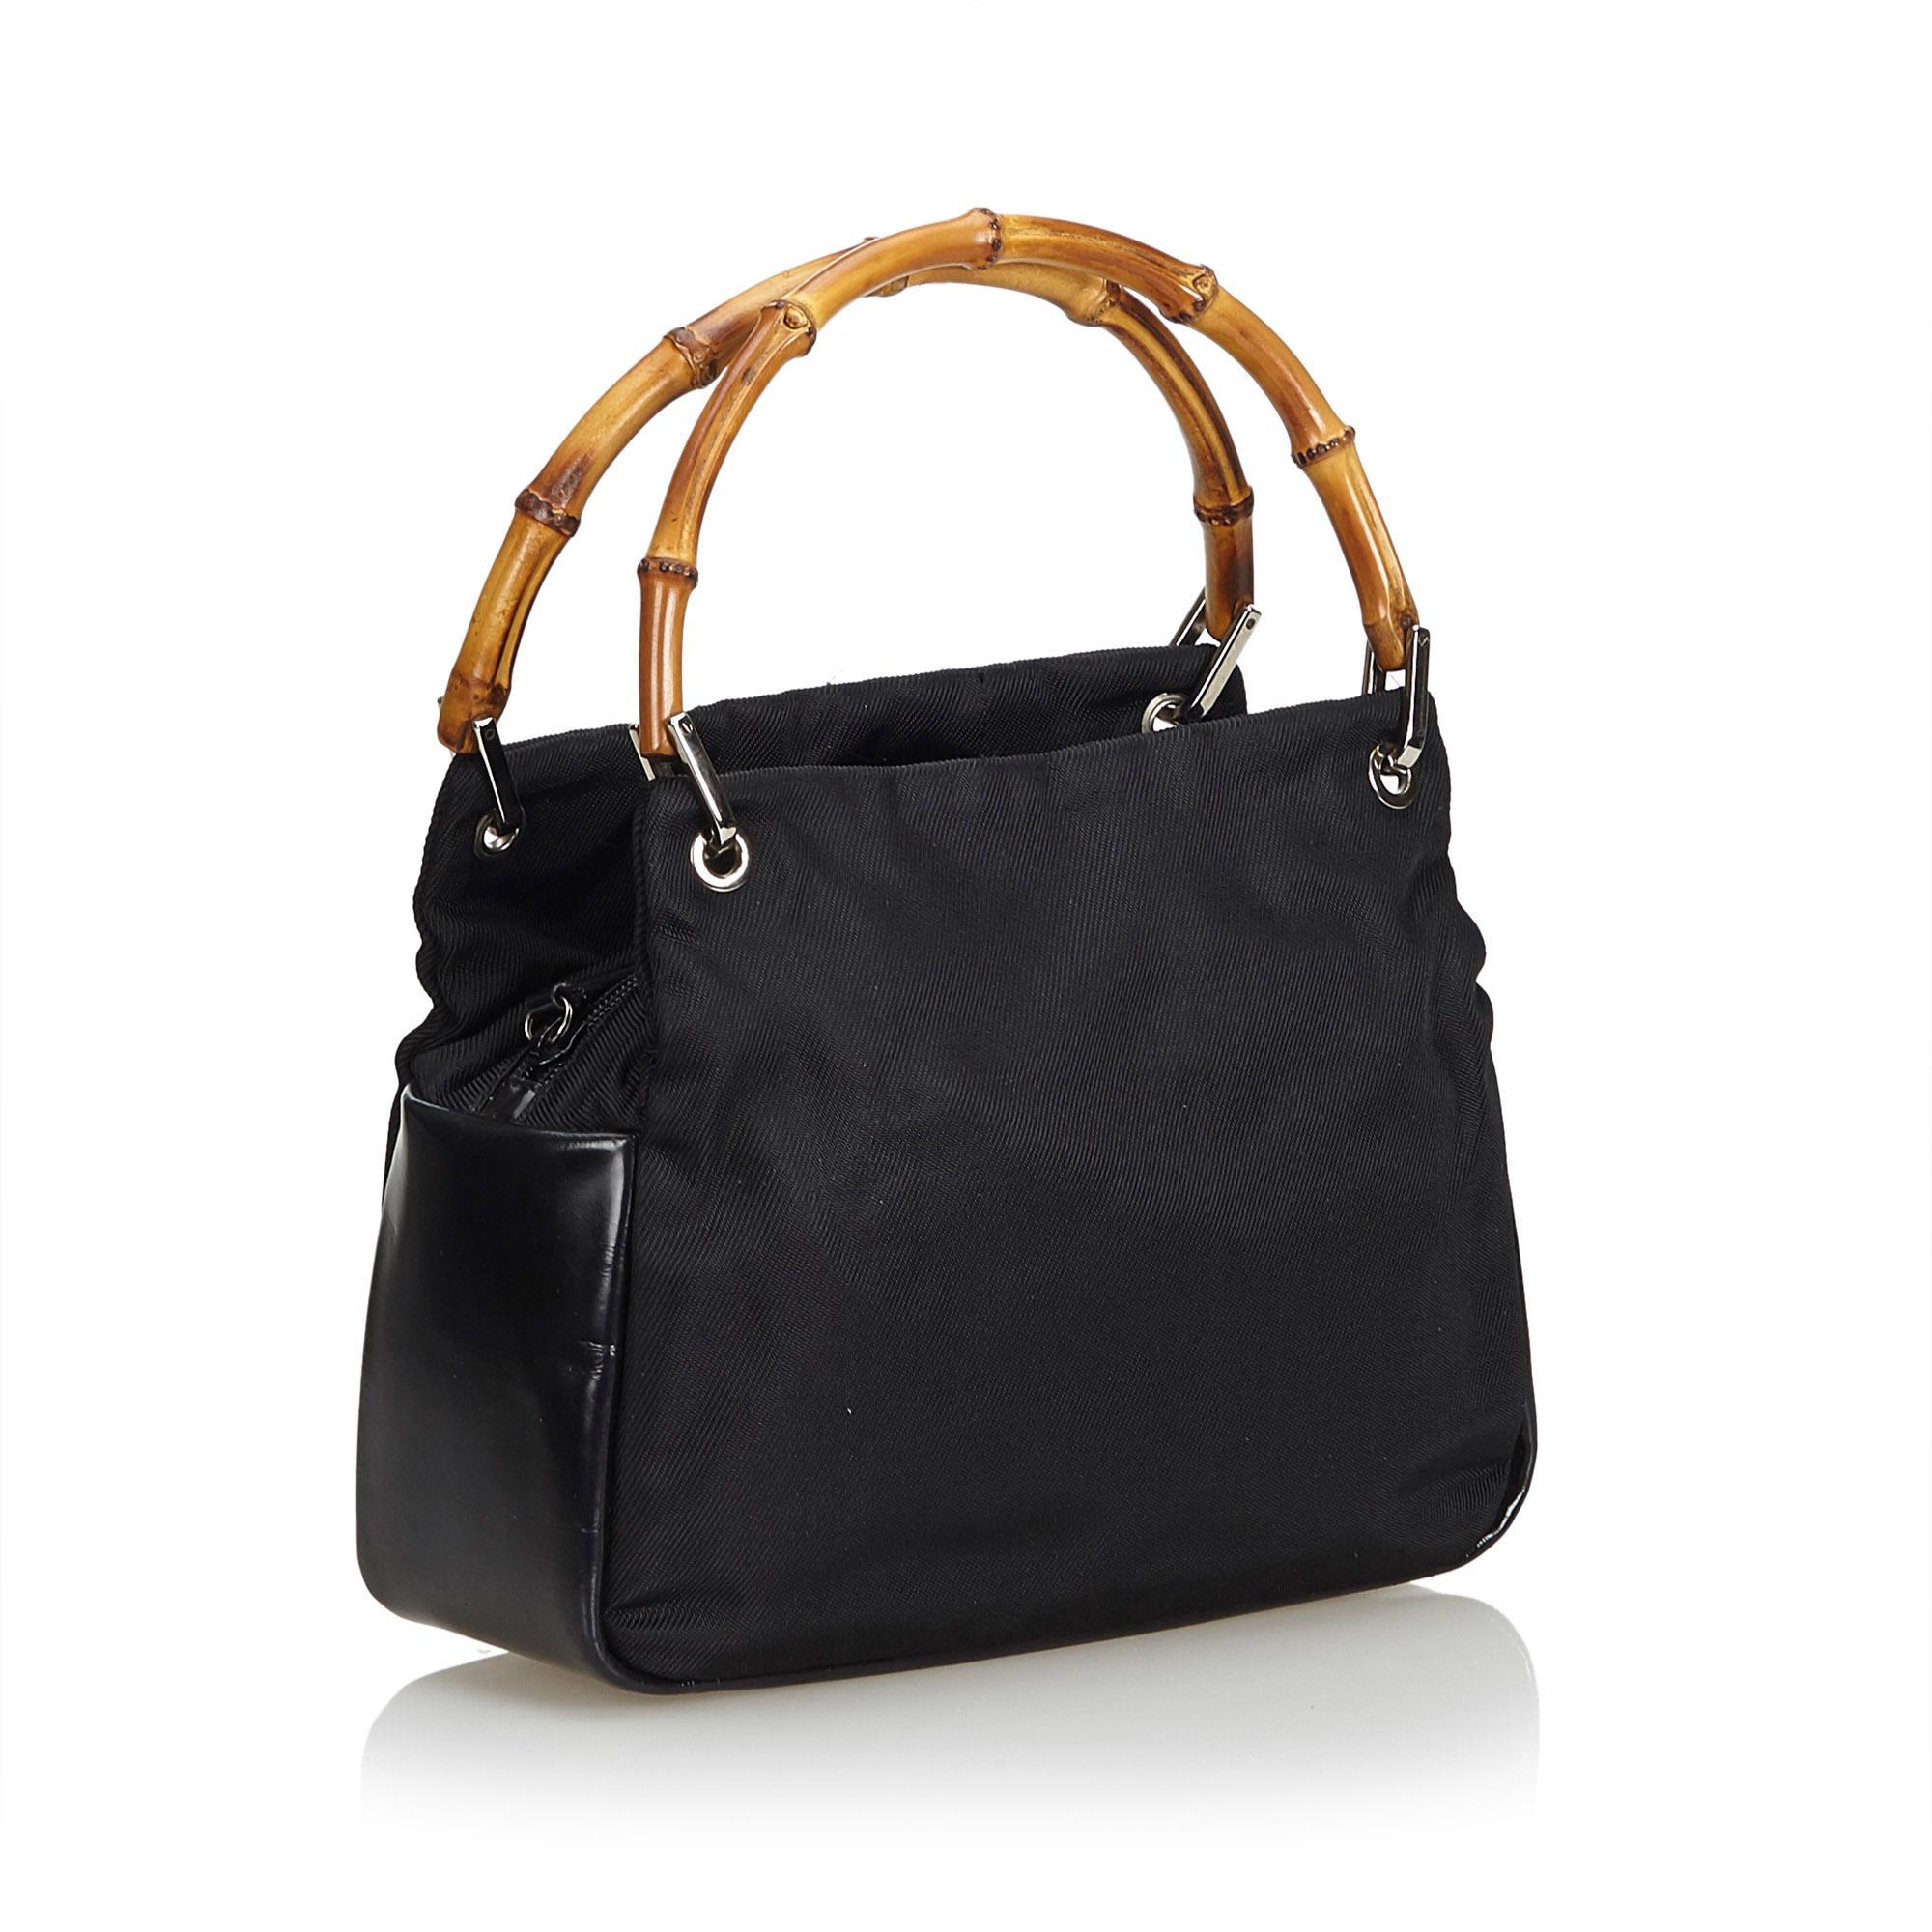 This handbag features a nylon body with leather trim, exterior side compartments, bamboo handles, a top zip closure, and an interior zip pocket. It carries as B+ condition rating.

Inclusions: 
This item does not come with